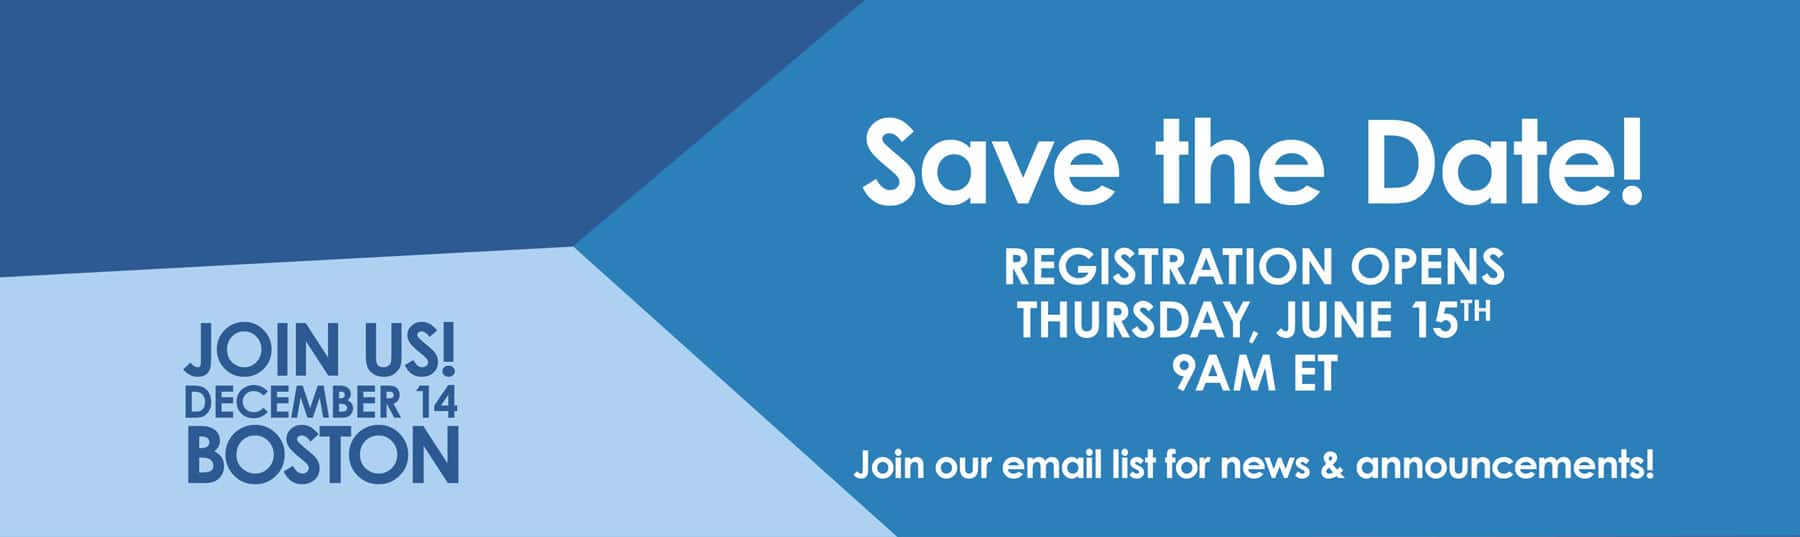 Save the date! Registration opens Thursday, June 15th at 9am ET. Join our email list for updates!